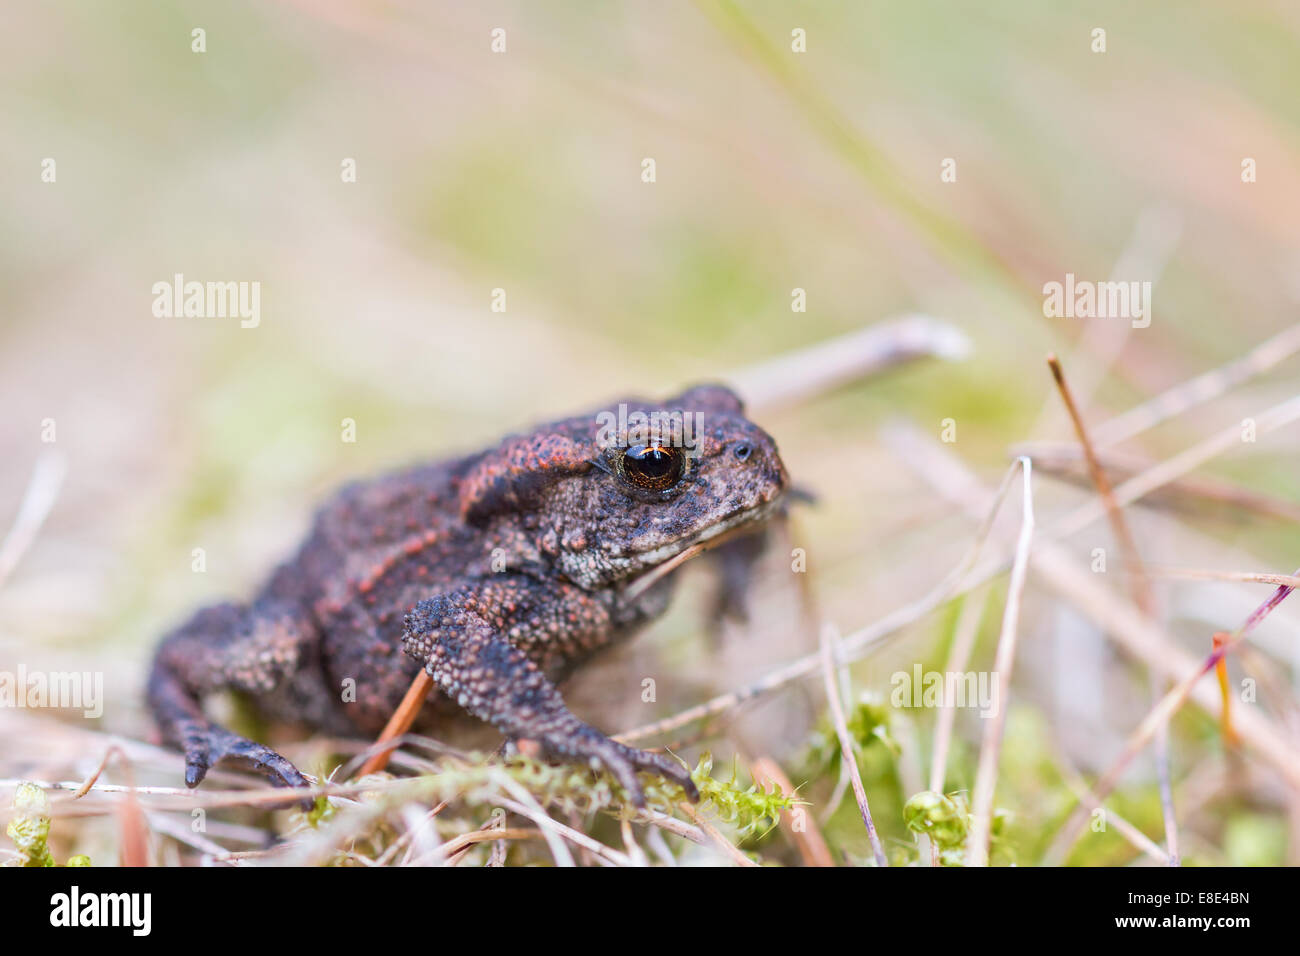 Common toad in the grass Stock Photo